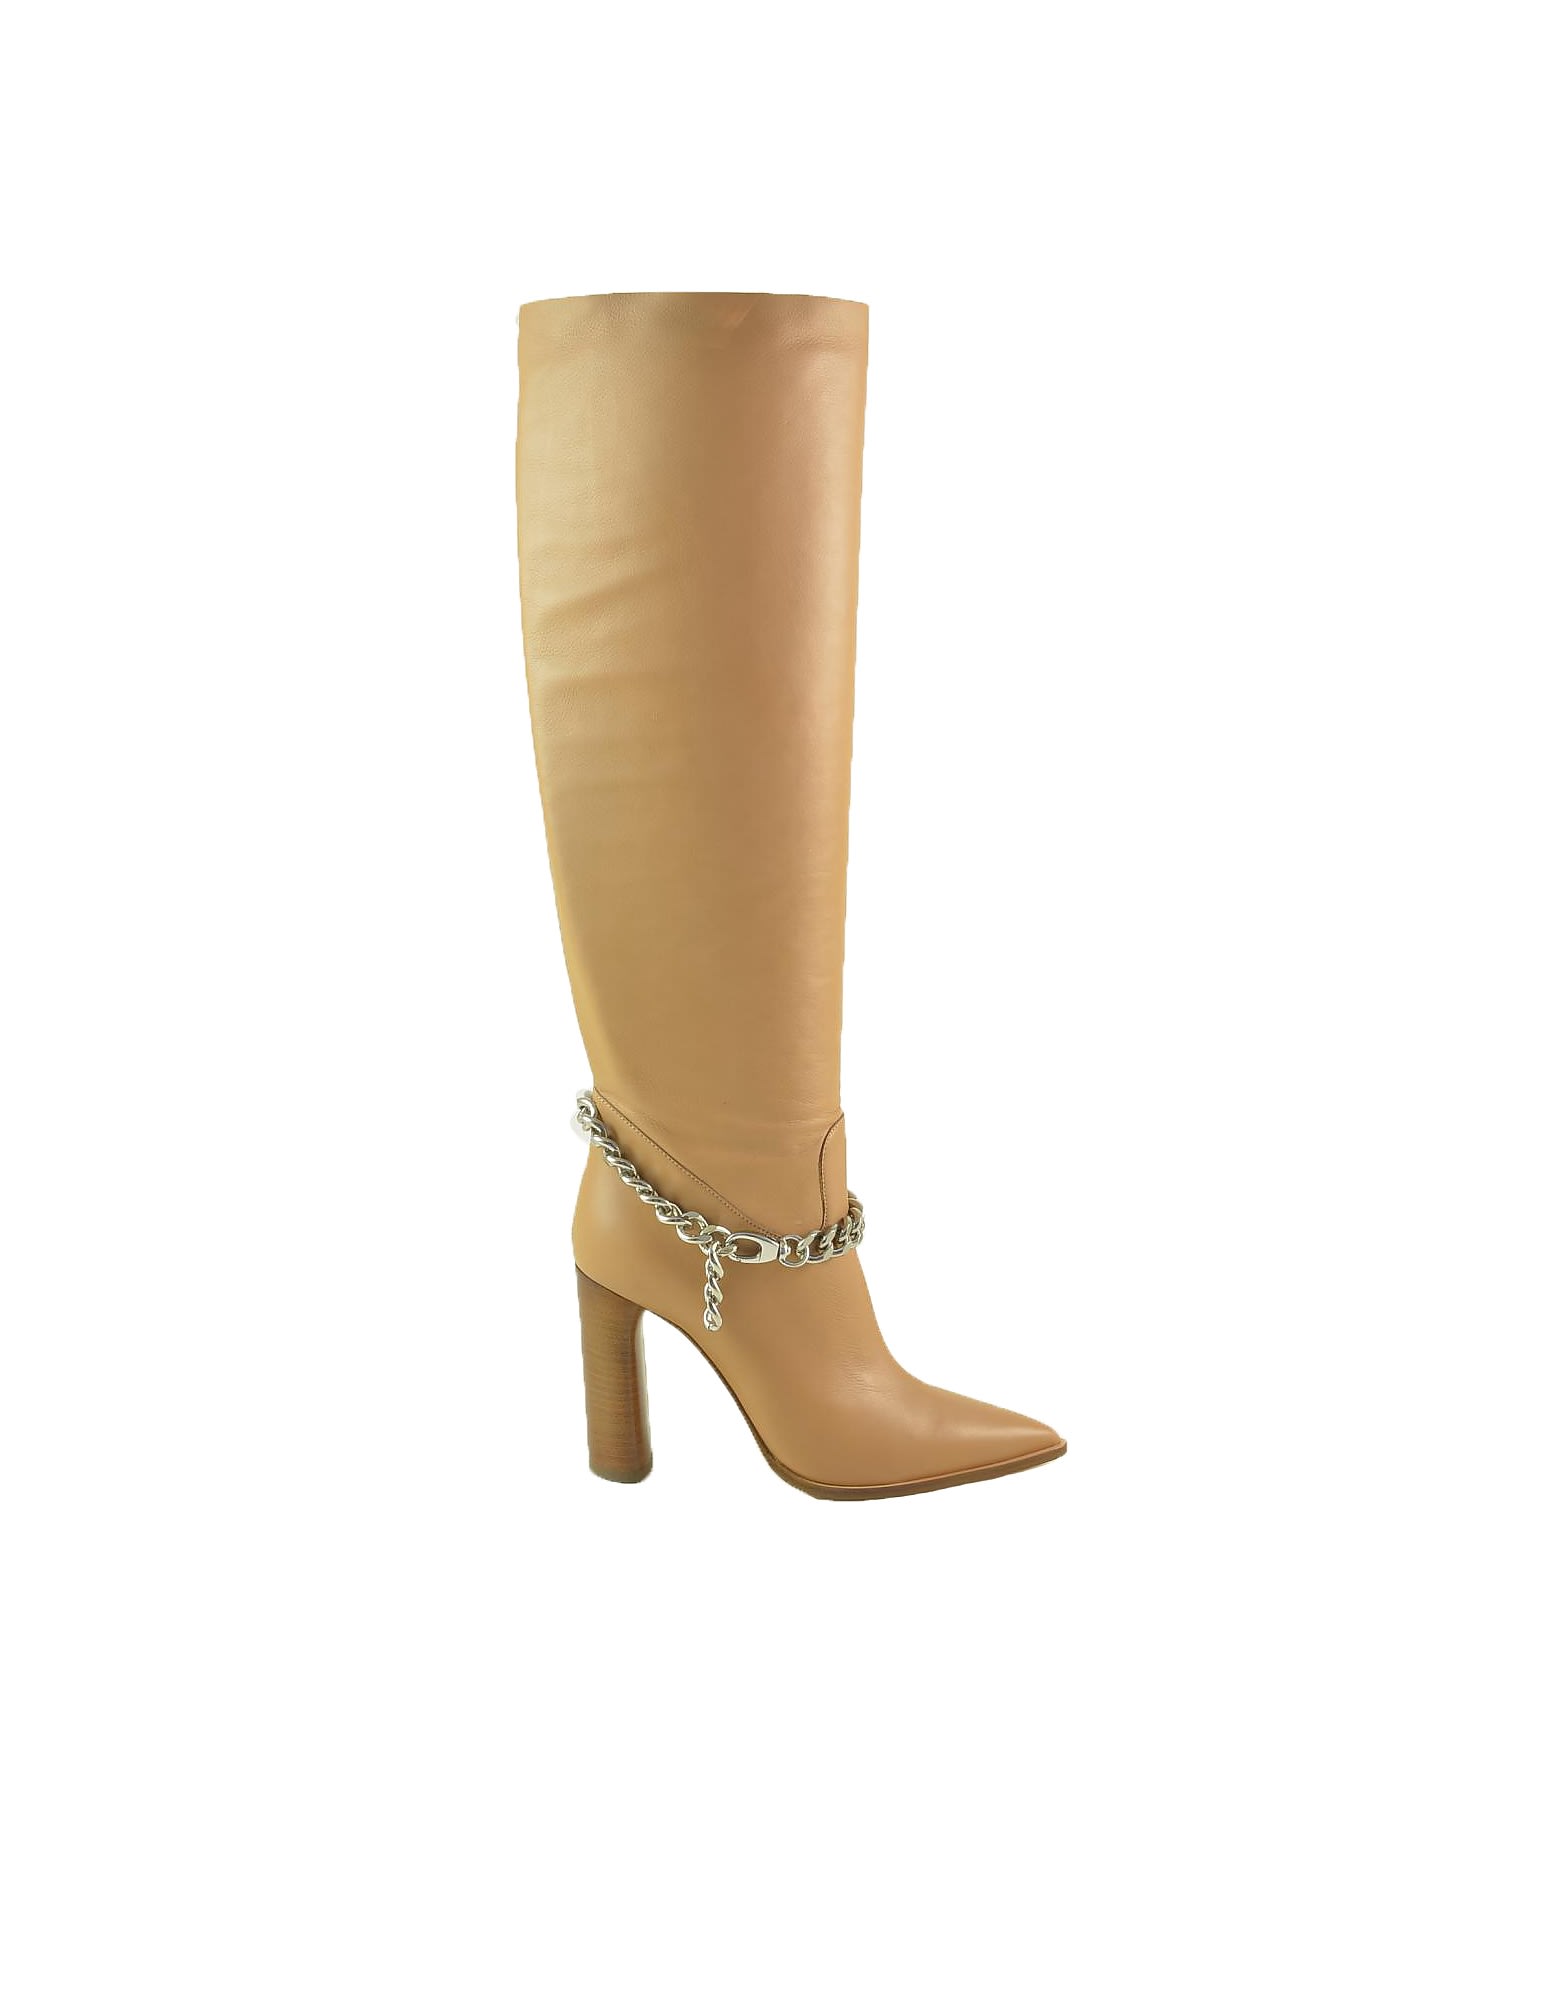 Casadei Beige Leather To-the-knee Boots